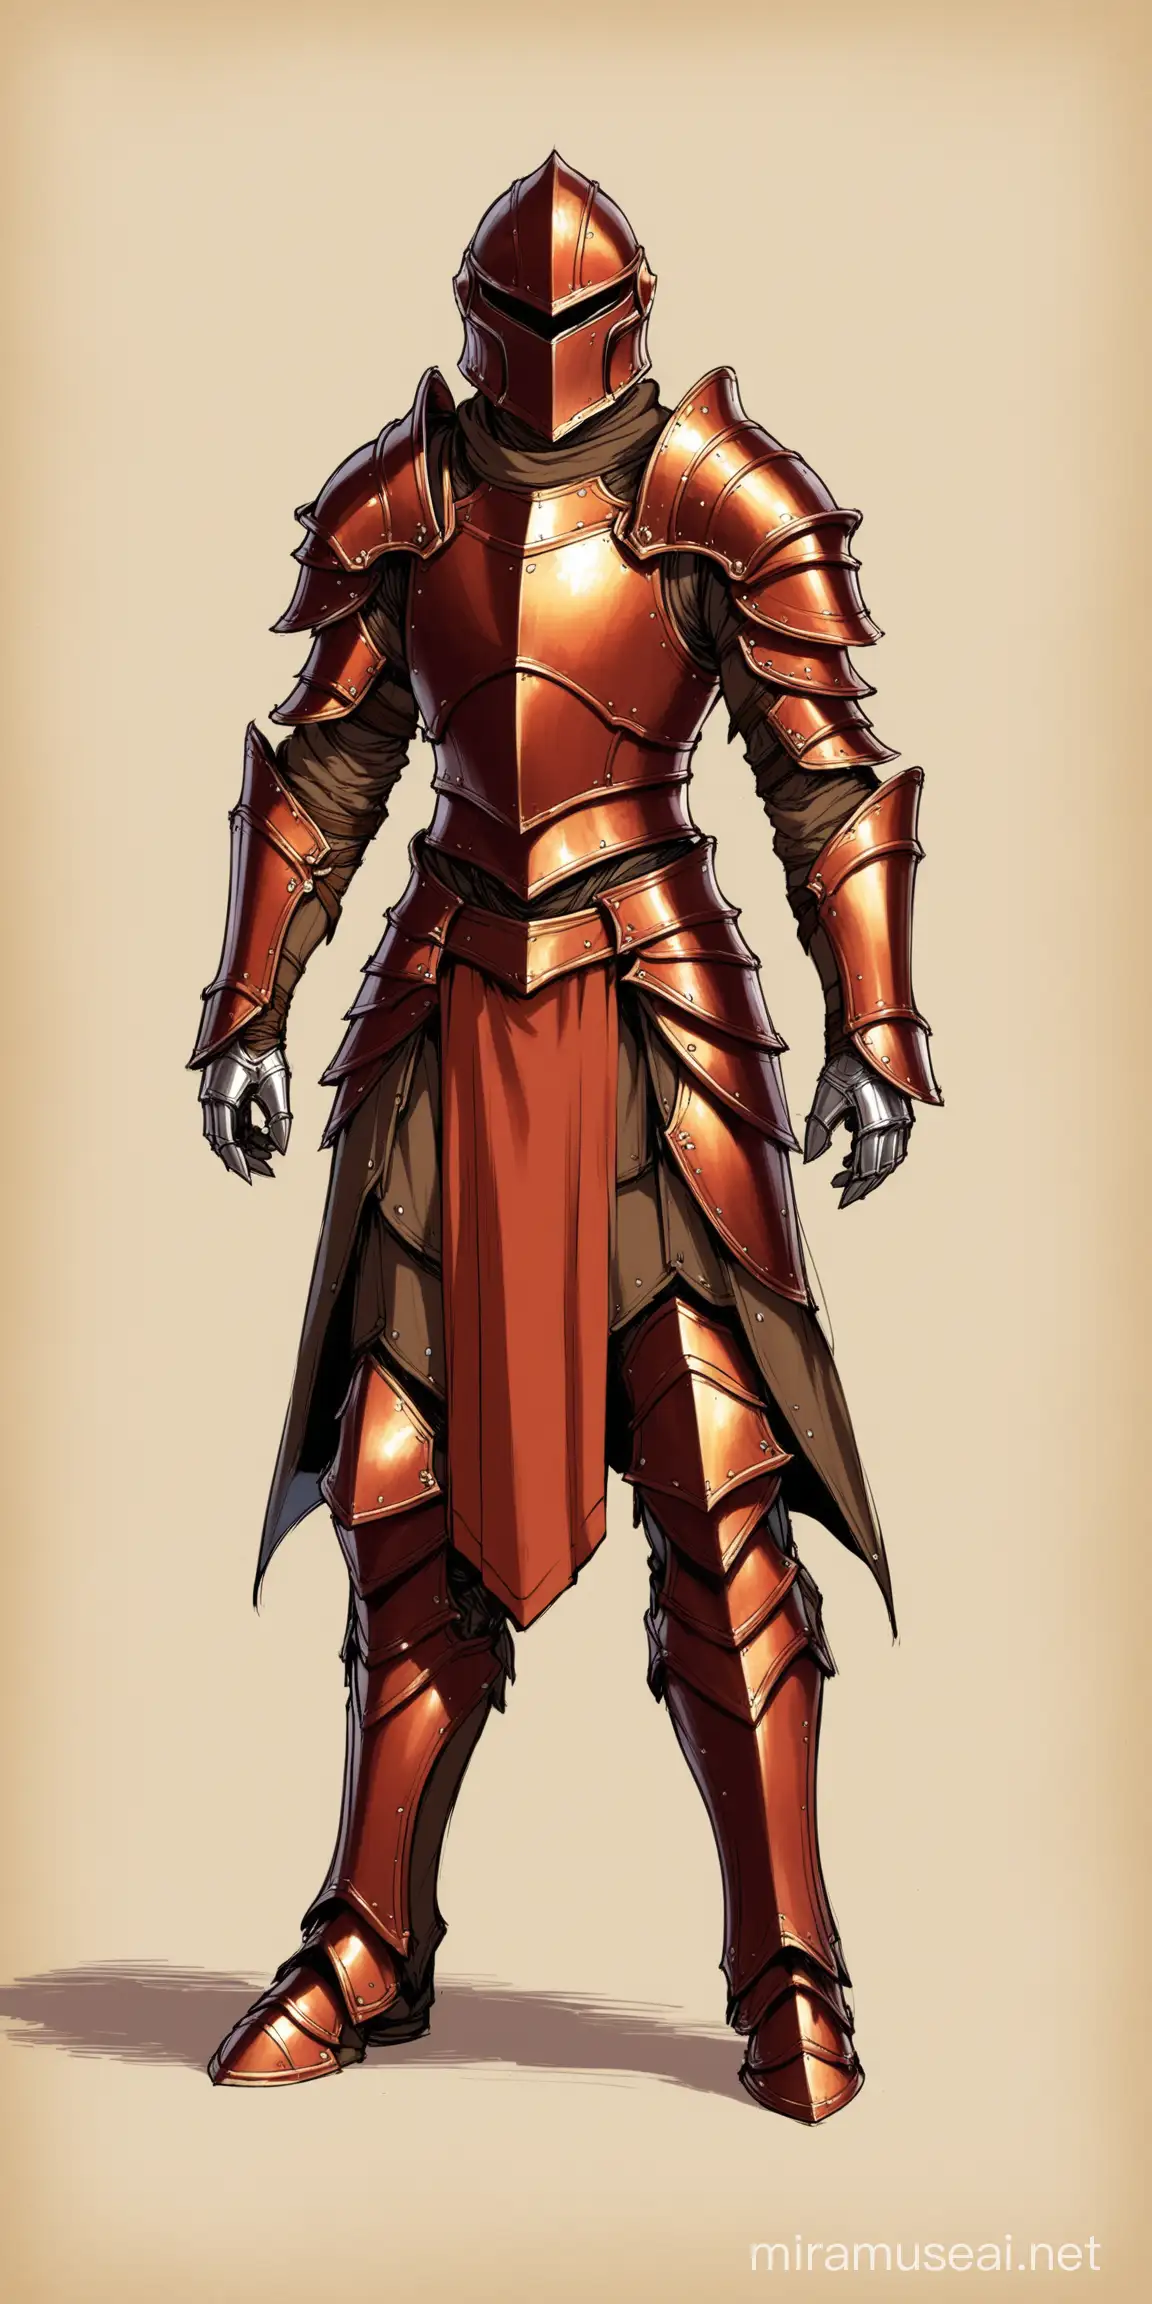 Male Warrior in Fantasy Iron Armor with Tan Brown and Red Accents